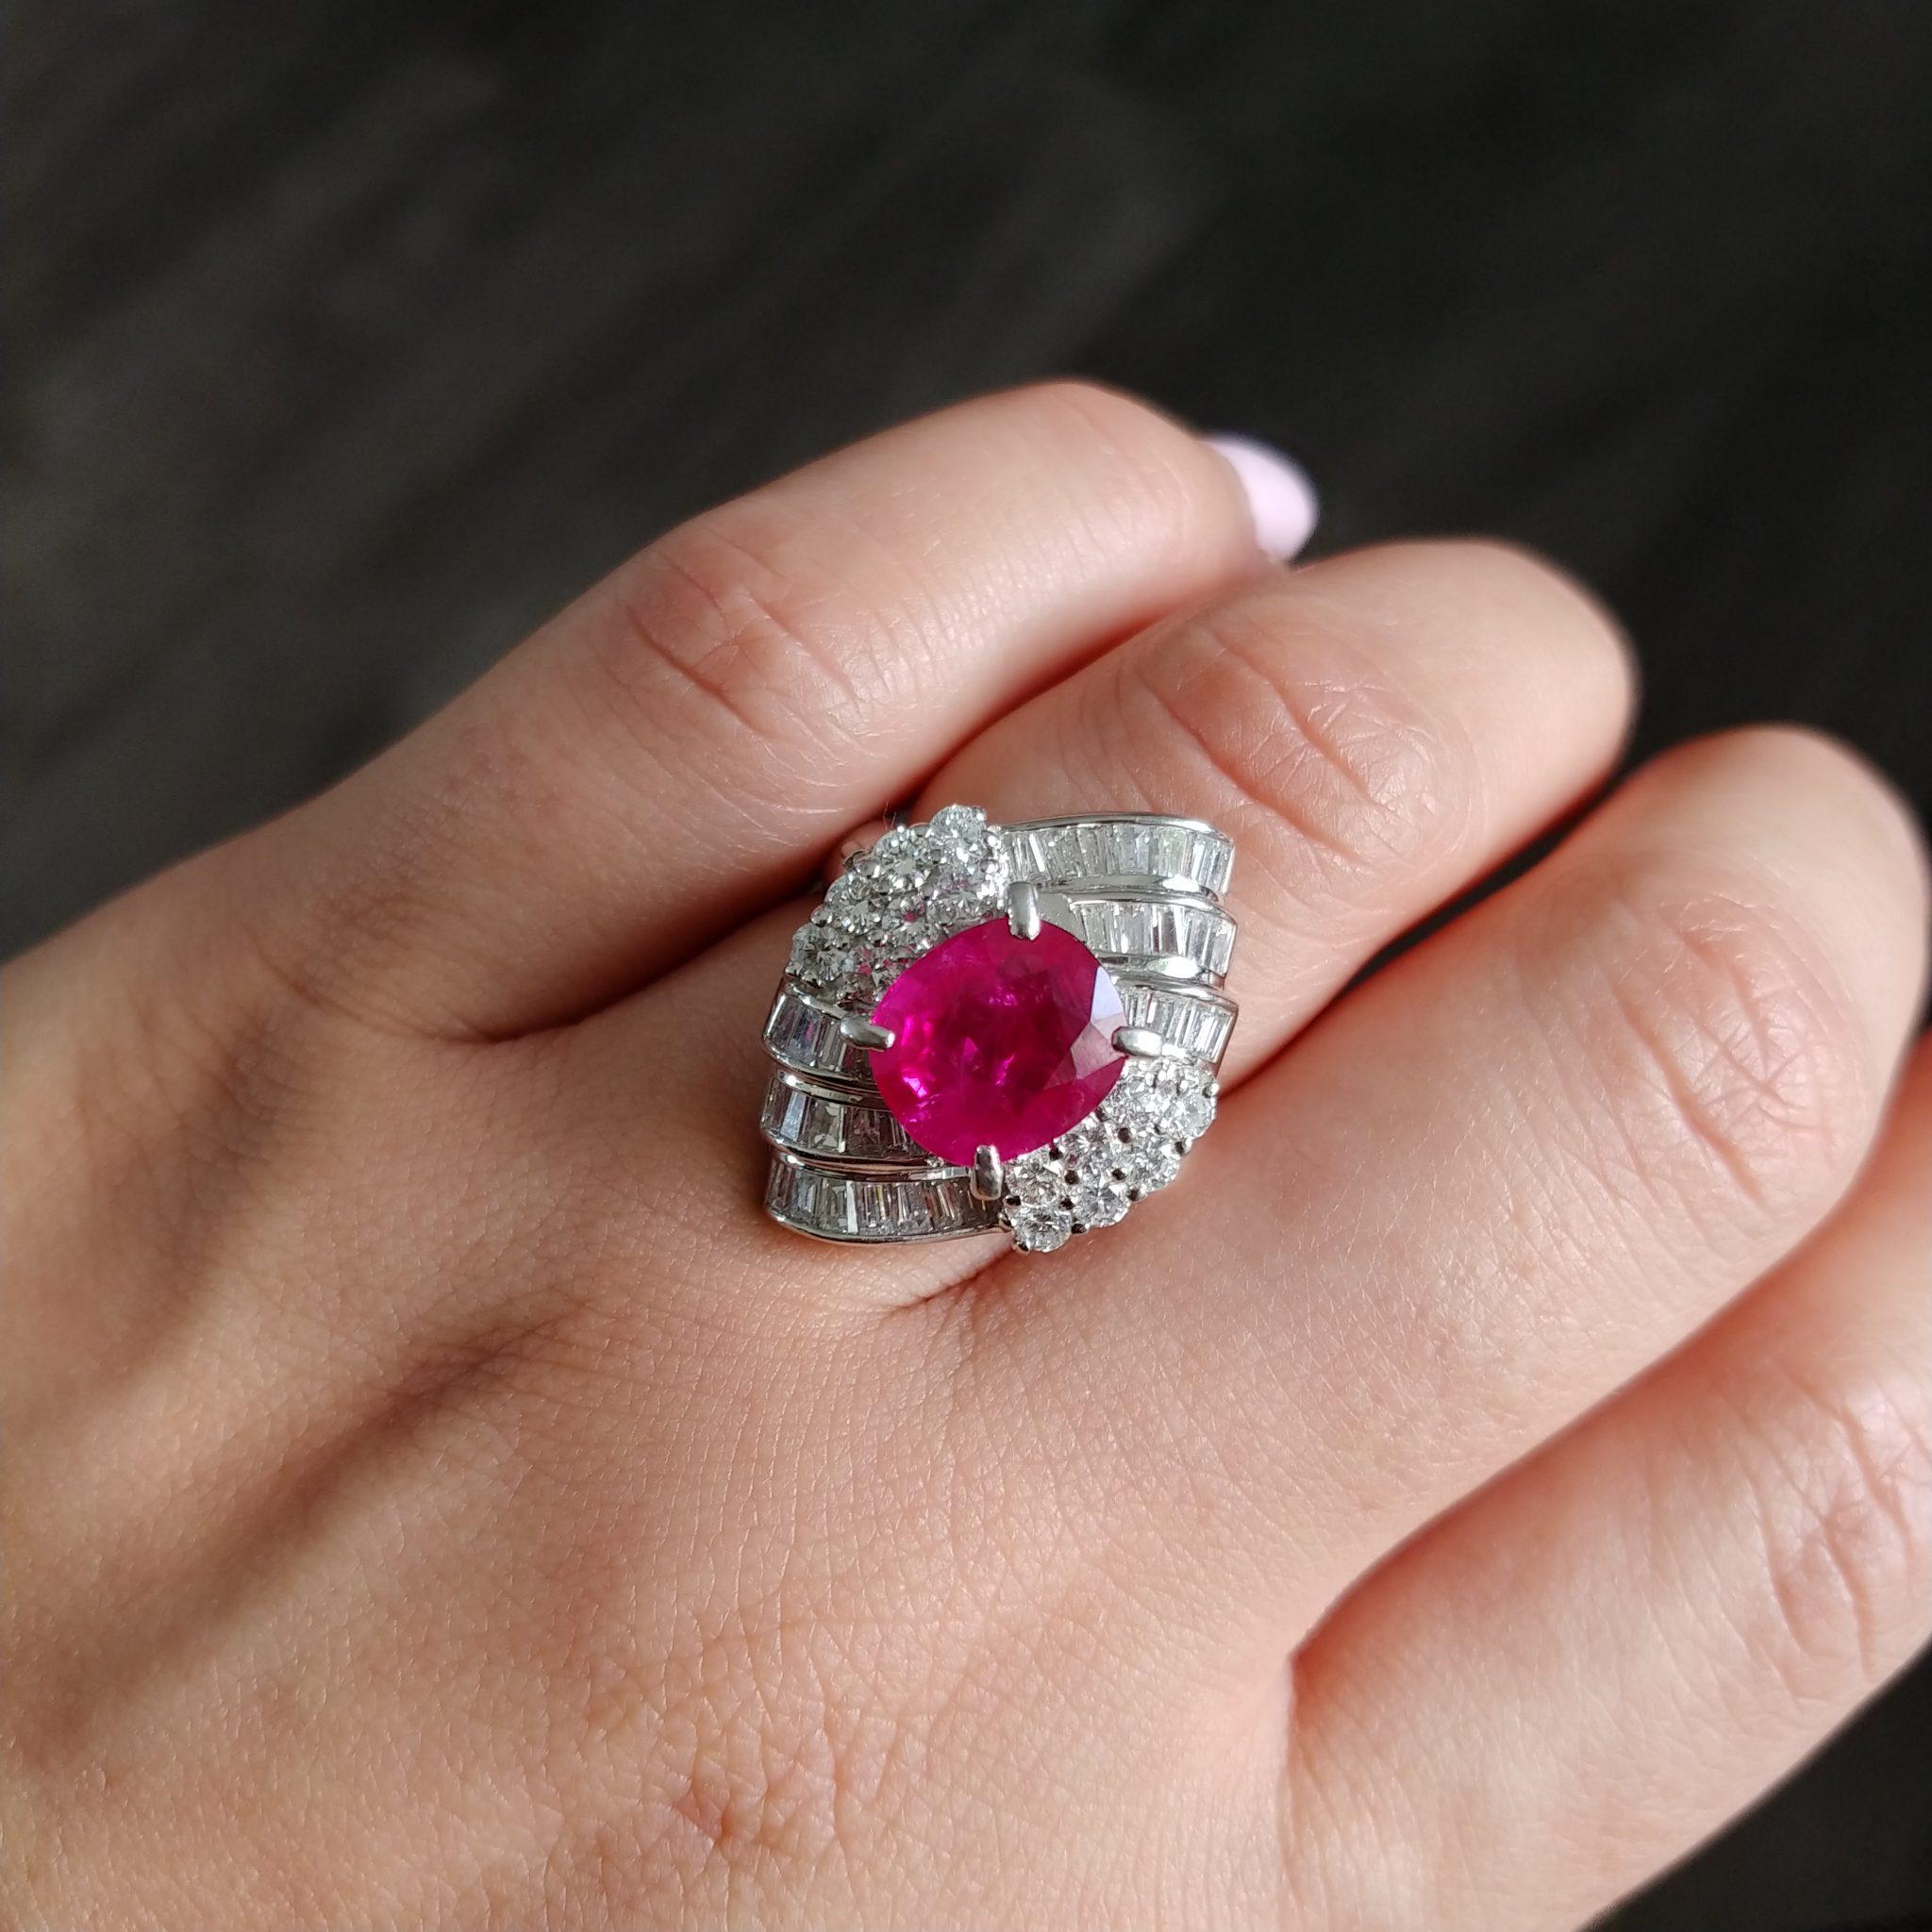 Women's 3.97 Carat Cushion Cut Ruby Diamond Cocktail Ring For Sale